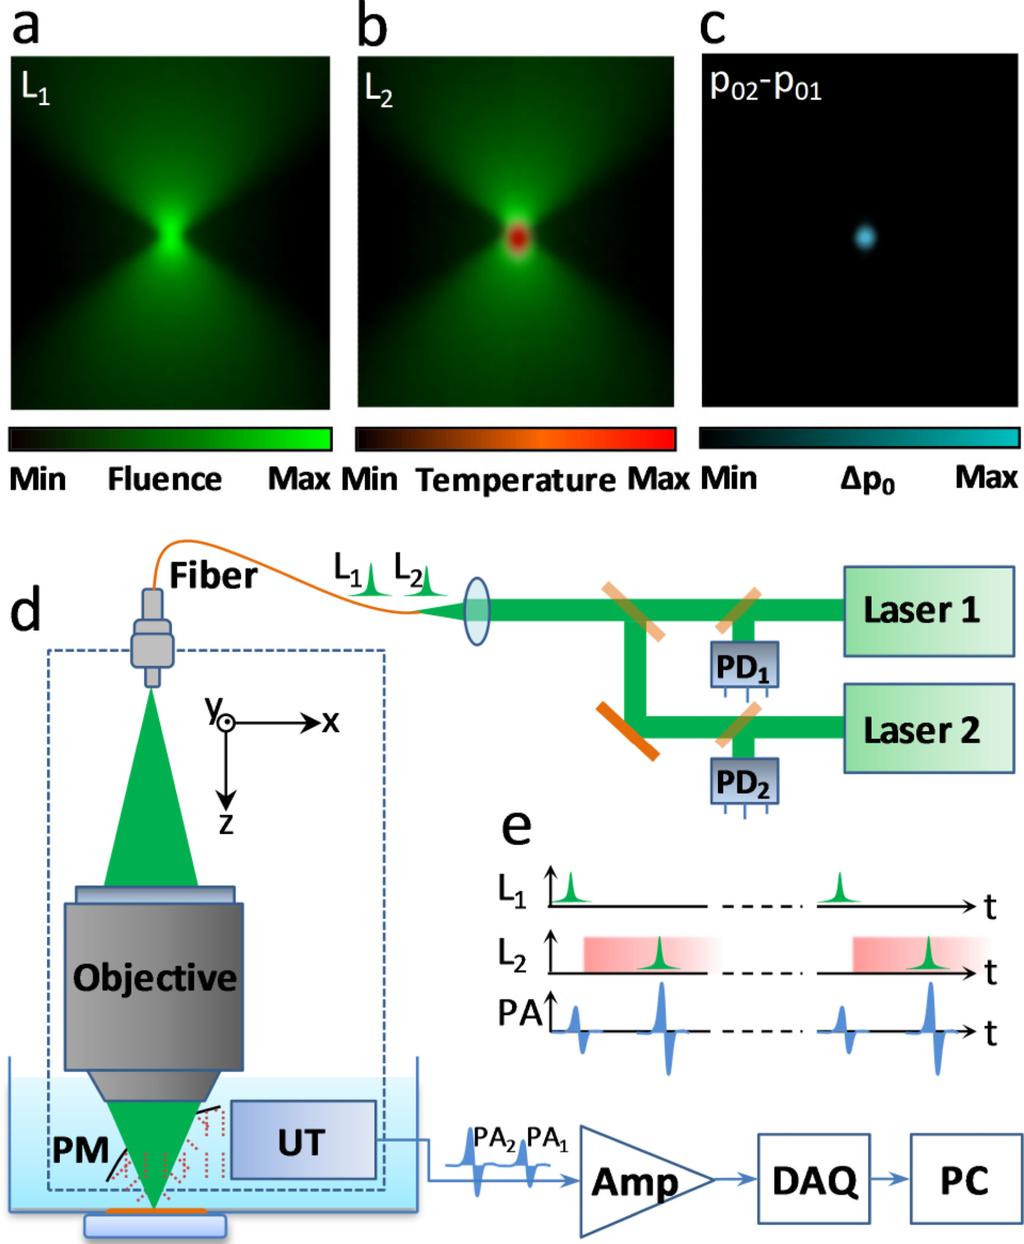 Wang et al. Page 9 Fig. 1. (a) Fluence distribution for laser pulse 1 (L 1 ). (b) Residual temperature rise from laser pulse 1 and fluence distribution of laser pulse 2 (L 2 ).